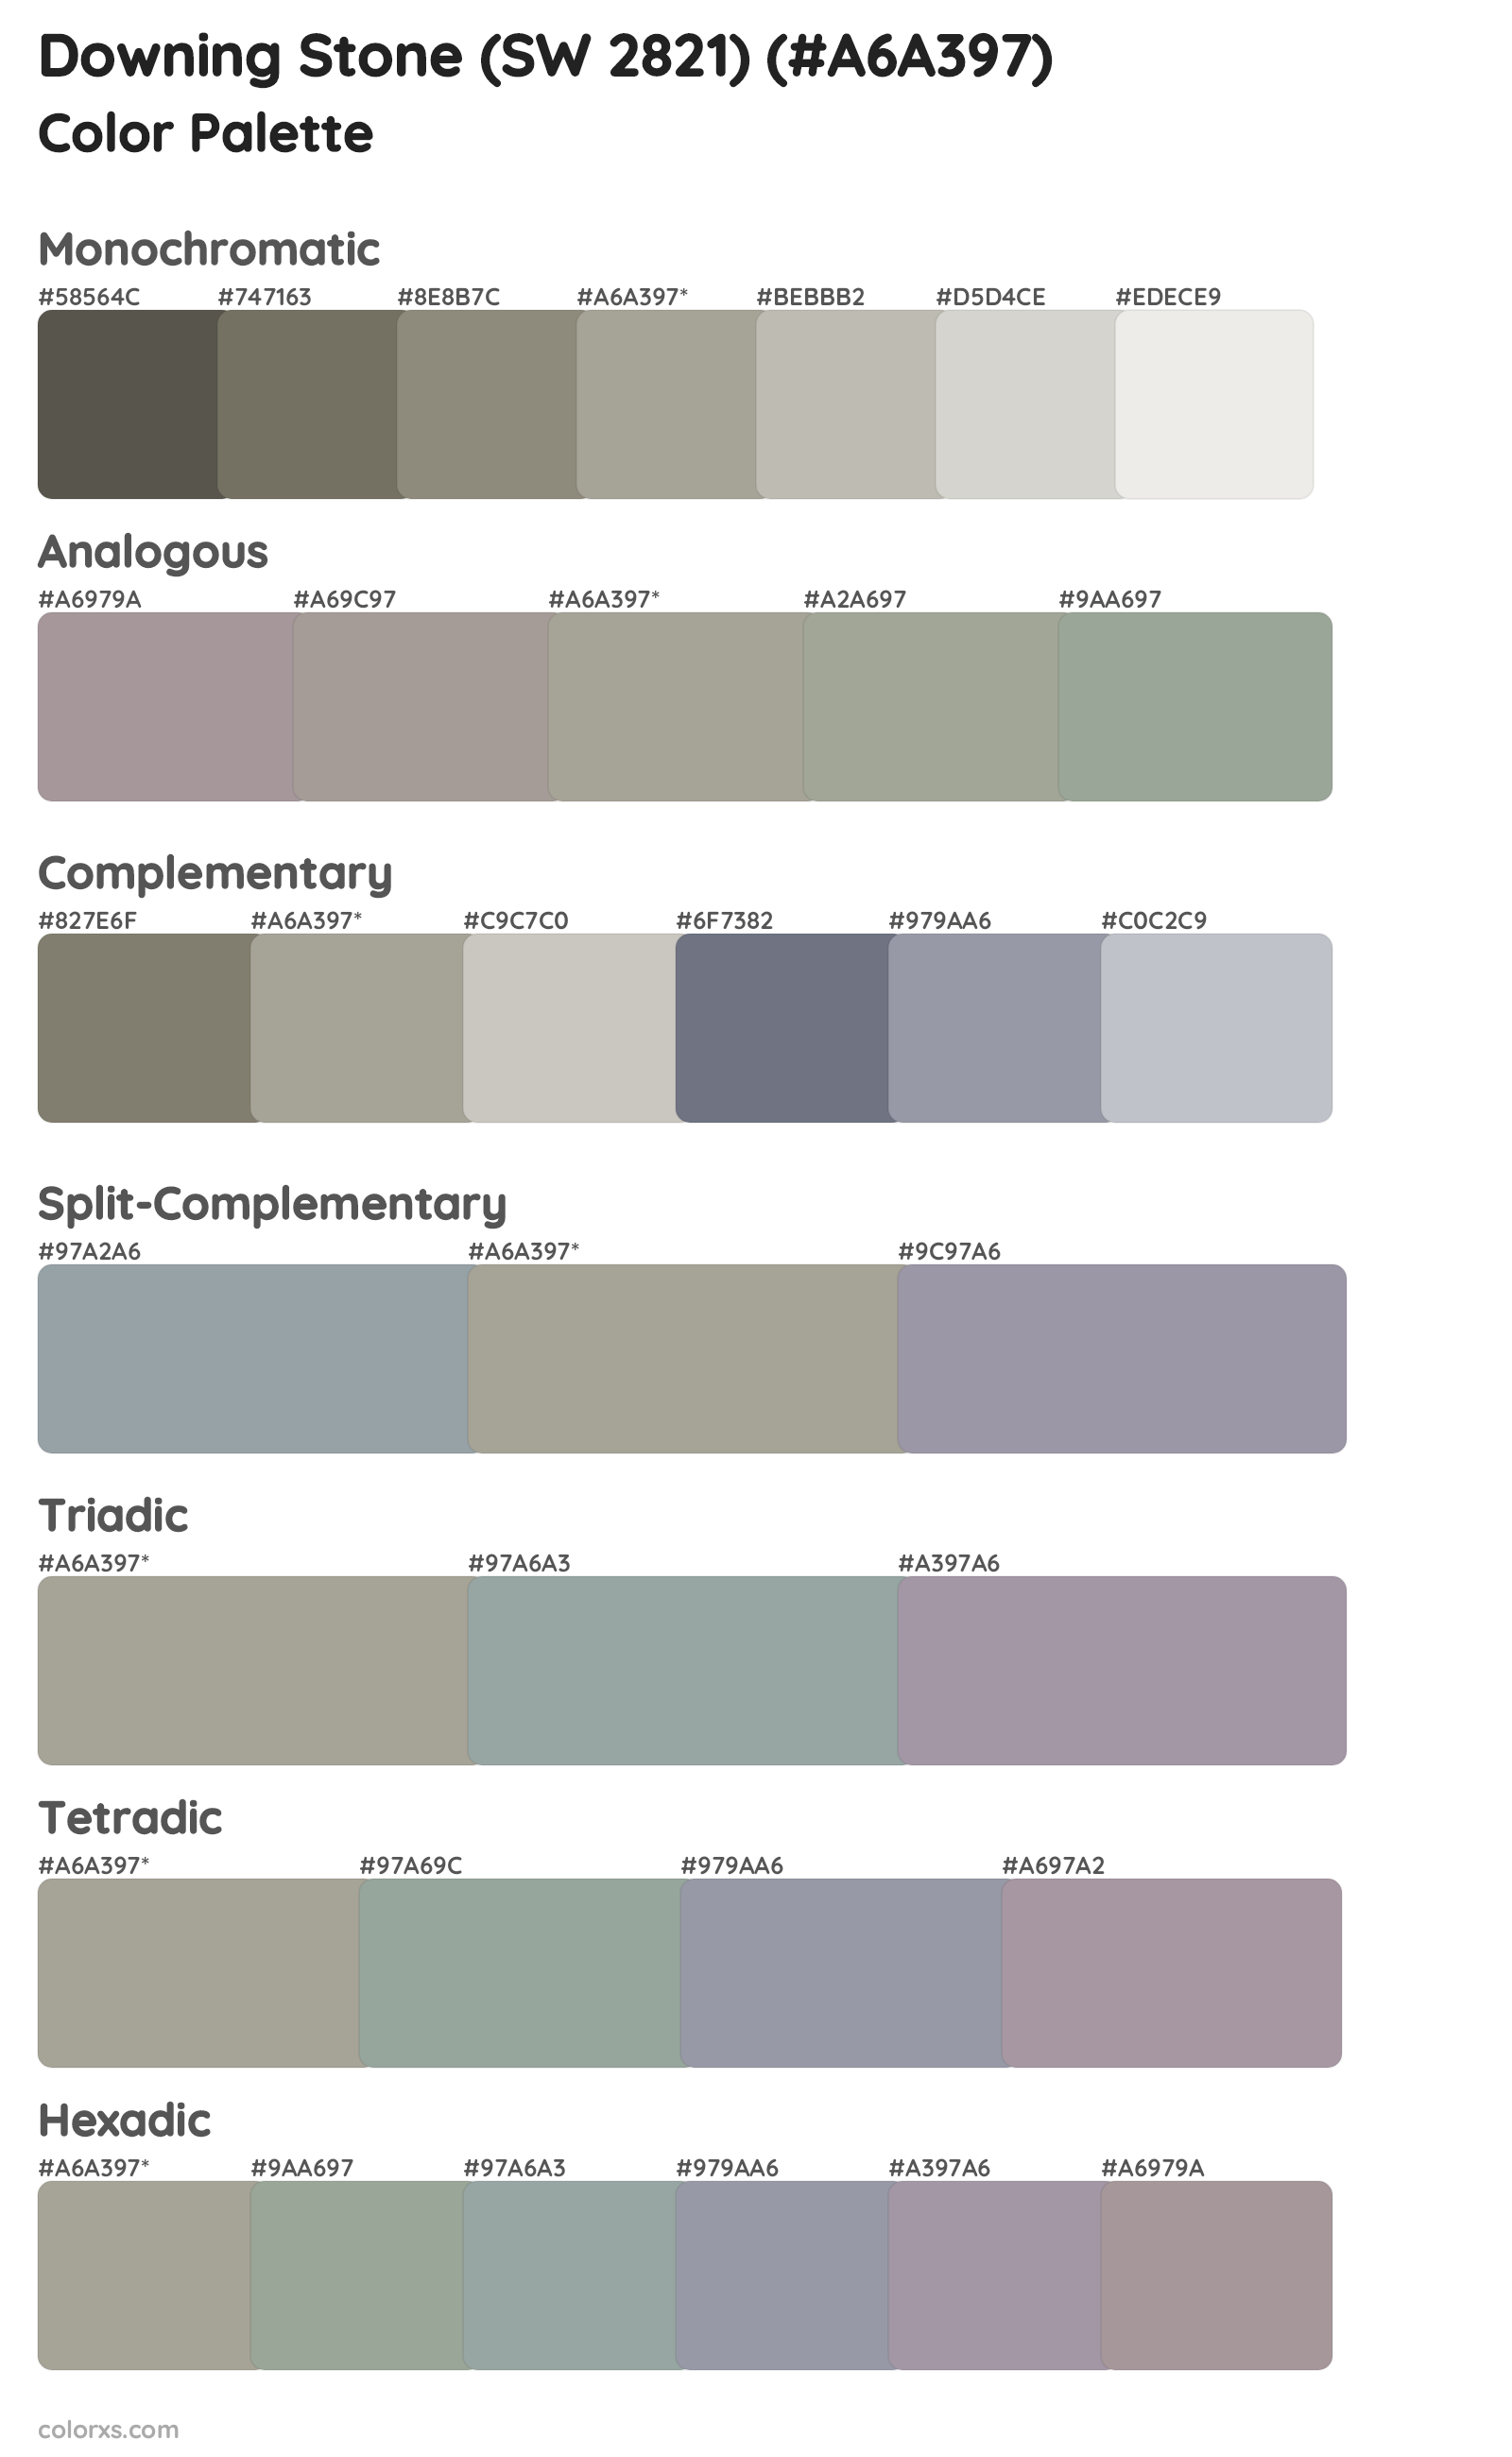 Downing Stone (SW 2821) Color Scheme Palettes